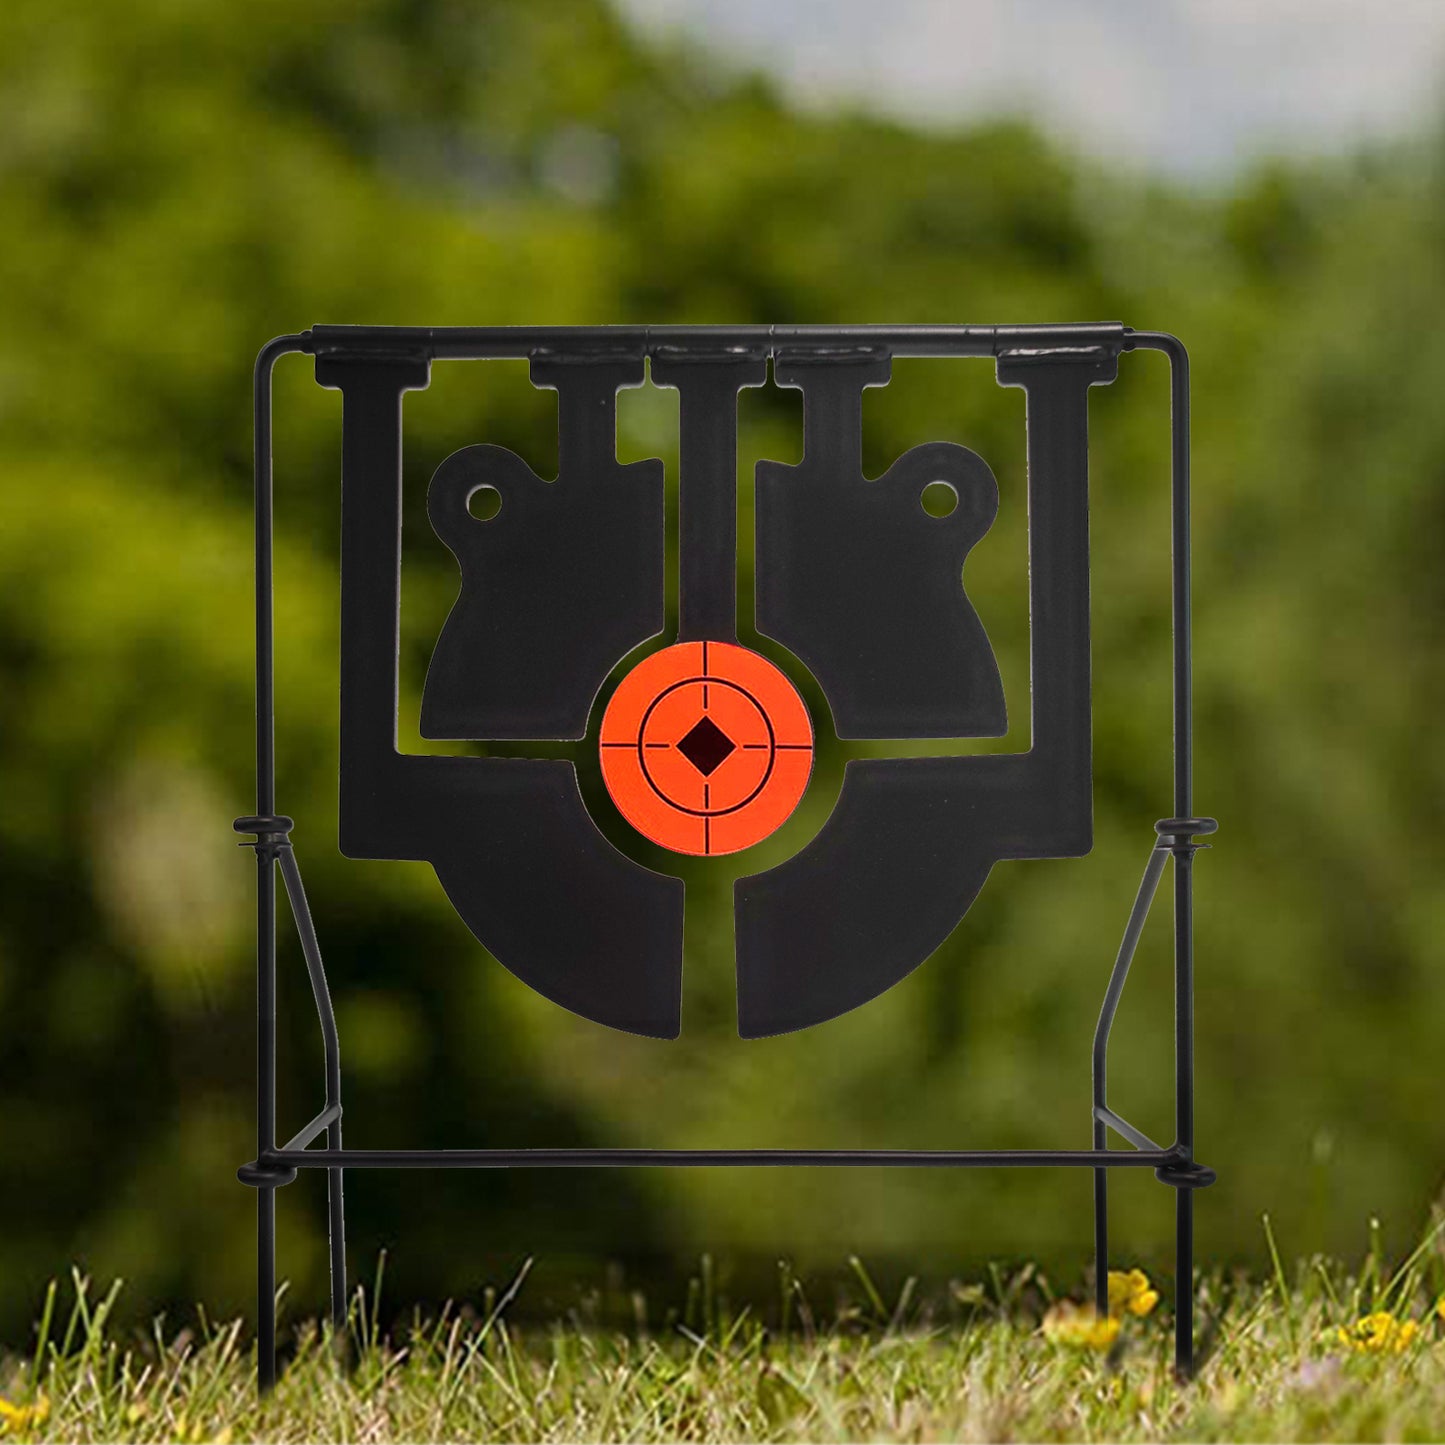 ATFLBOX 5 in 1 Rimfire Resetting Target, Heavy Metal Spinning Airgun Rifles and Handguns Shooting Target for Outdoor and Backyard, Rated for .22 .25 .30 Caliber